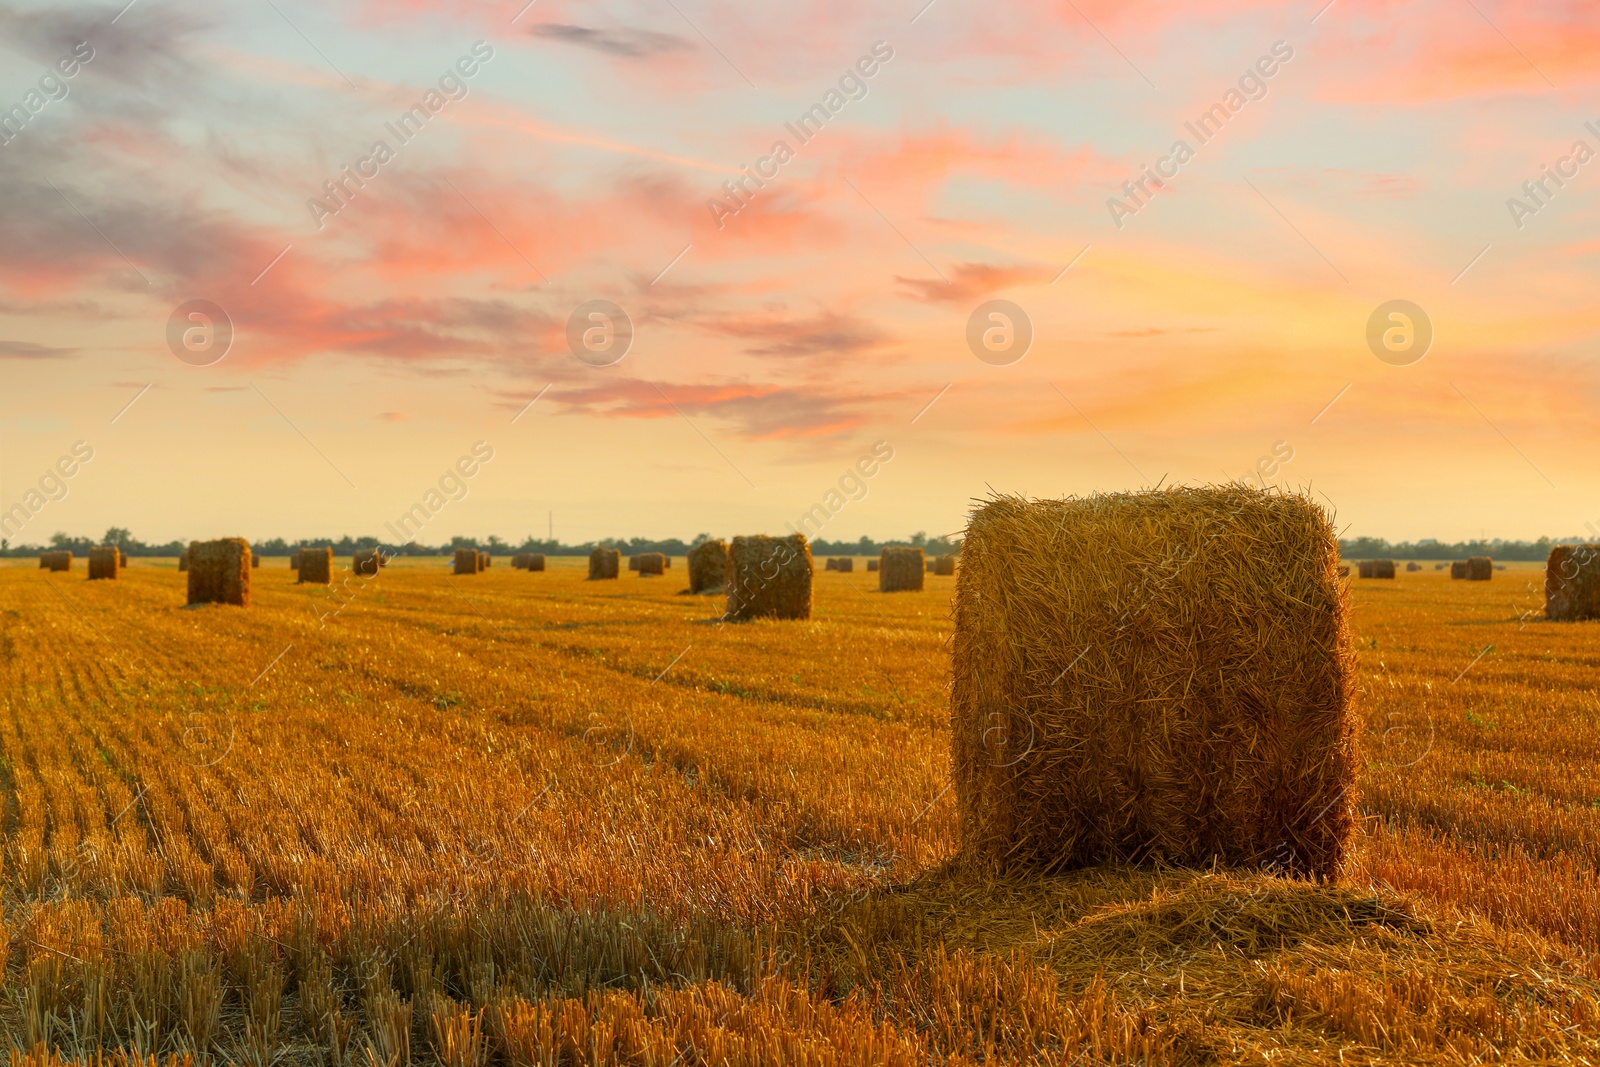 Image of Hay bales in golden field under beautiful sky at sunset